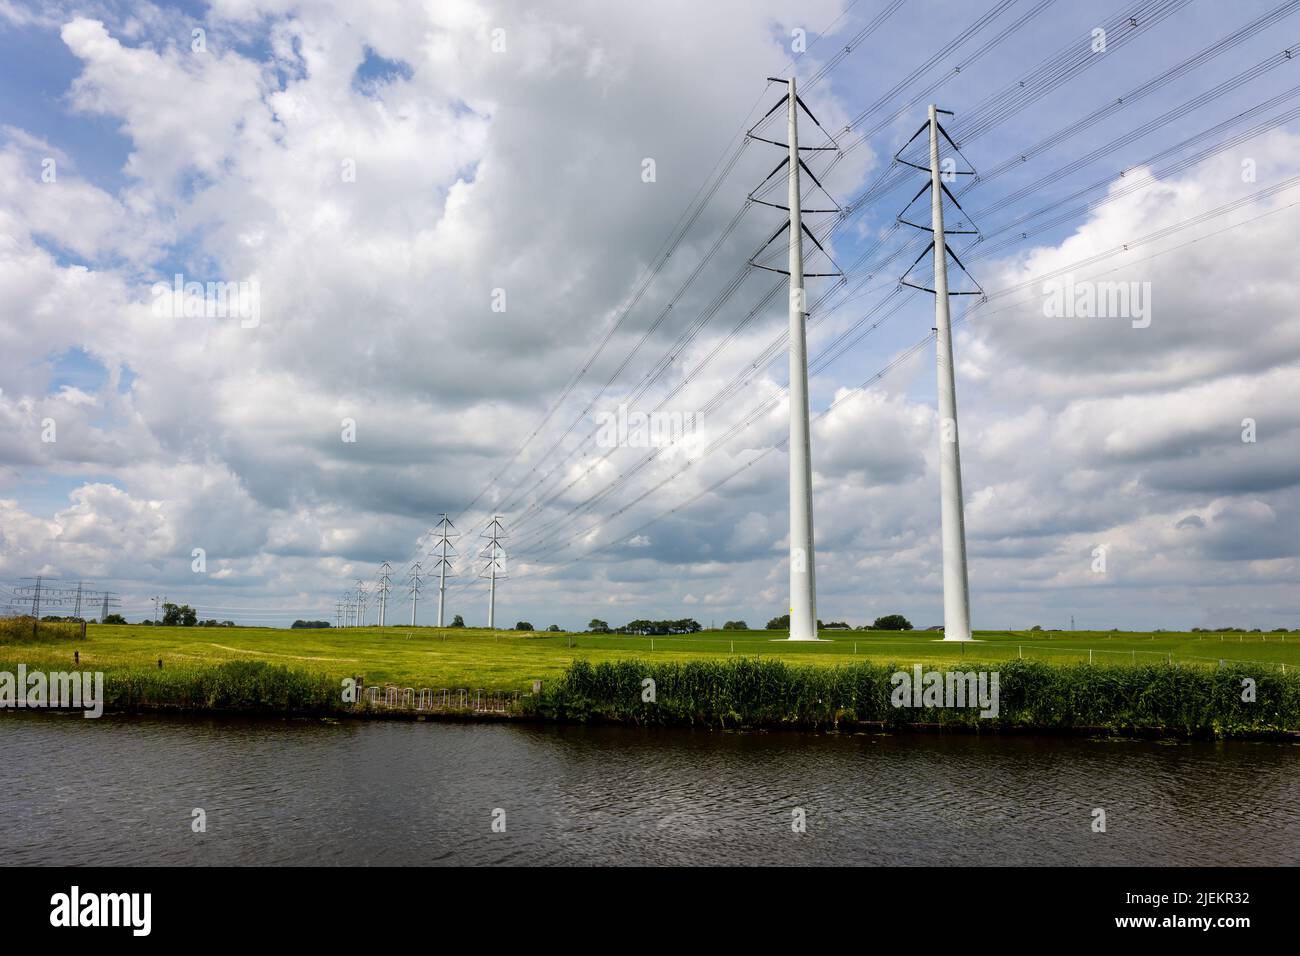 Expansion of the high-voltage grid with many high-voltage pylons to meet the growing demand for electricity, photo taken in the province of Groningen, Stock Photo